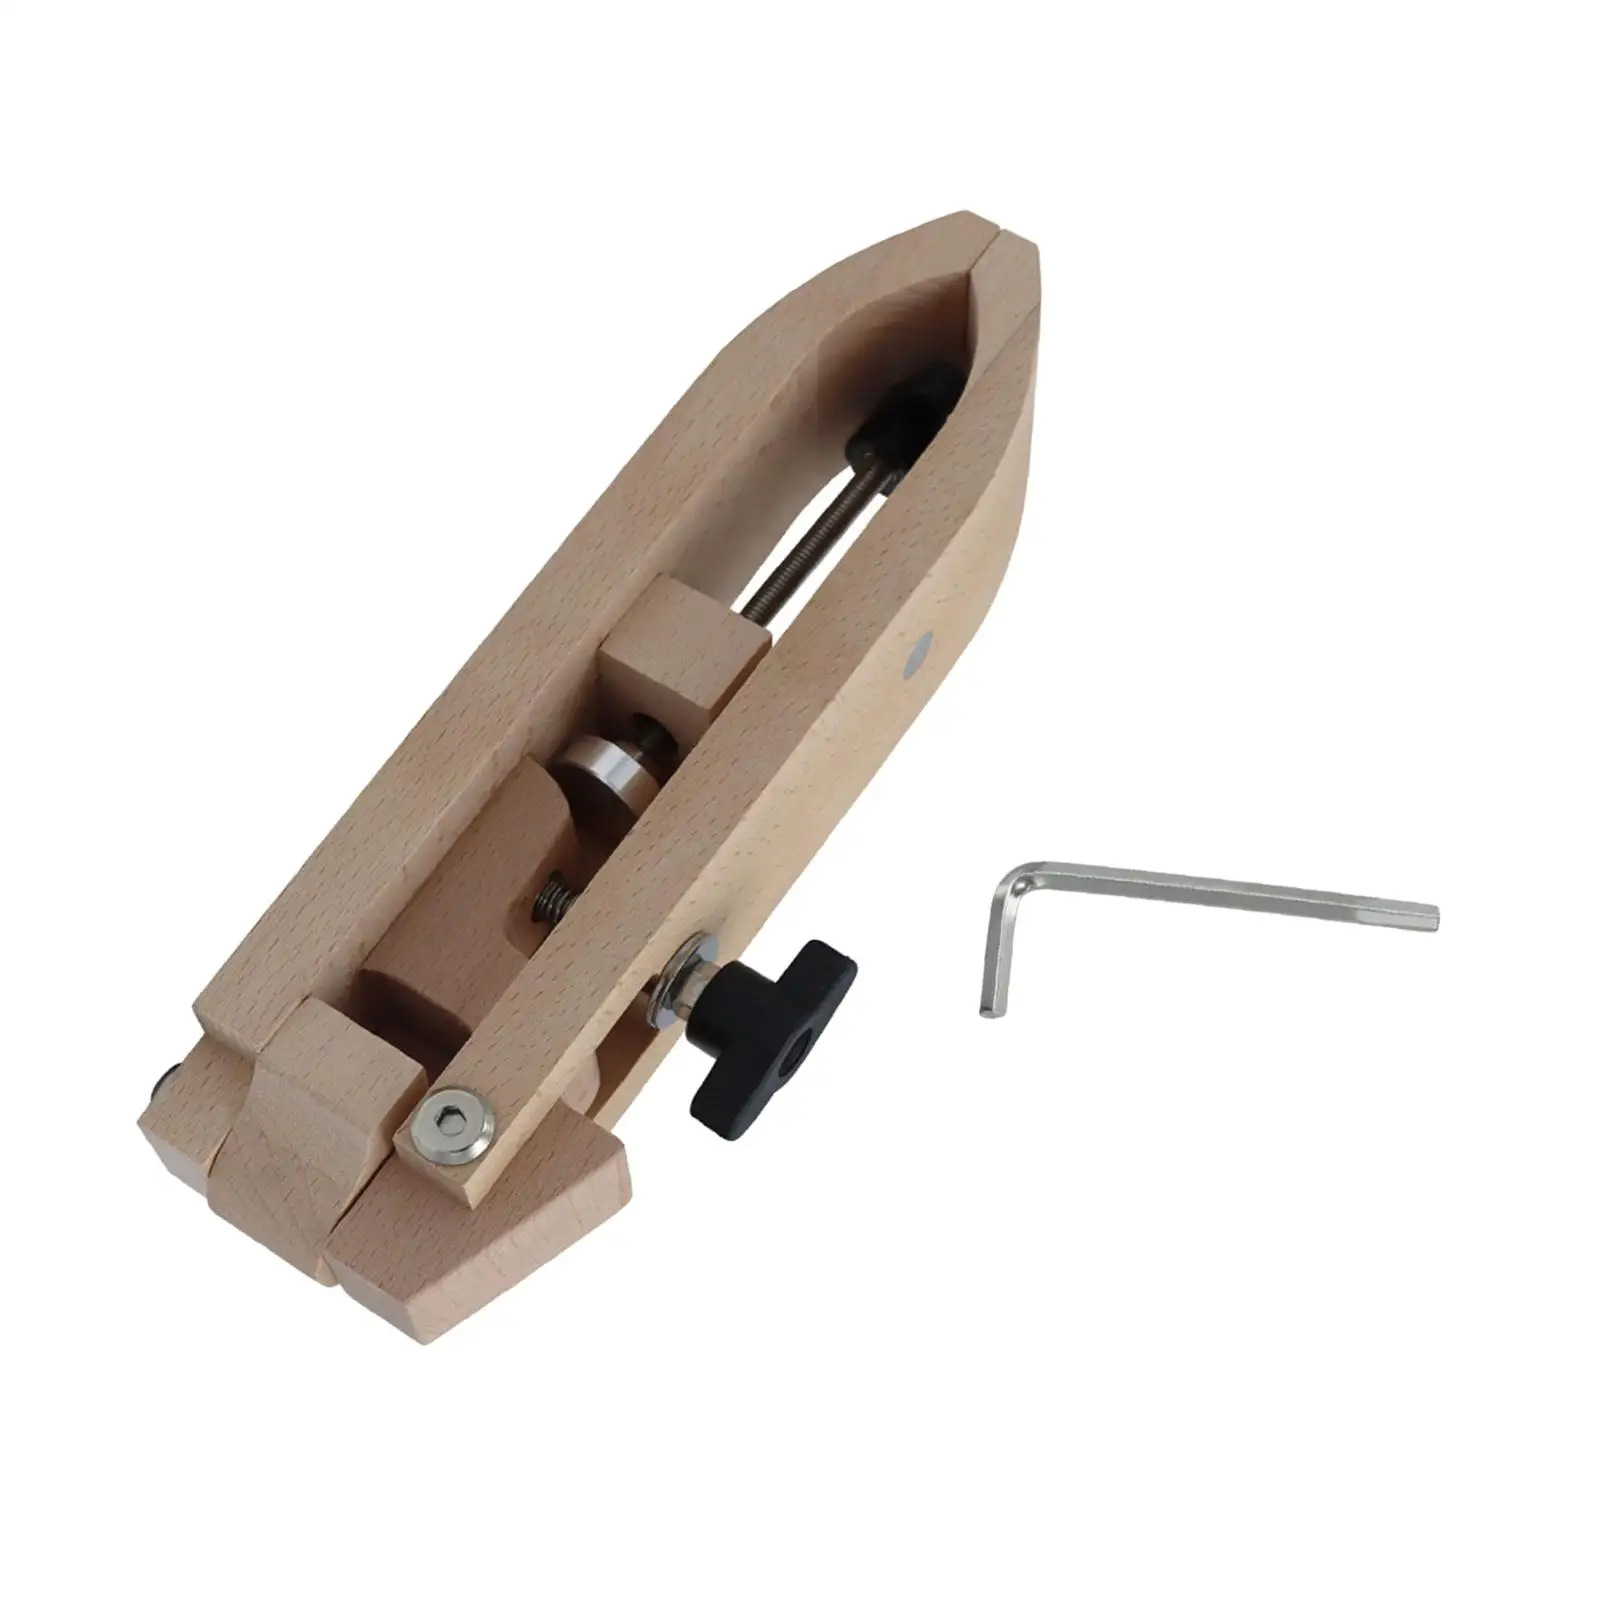 Stitching Ponies Tools Adjustable Leather Craft Rotation Tabletop Gripper for Hand Stitching